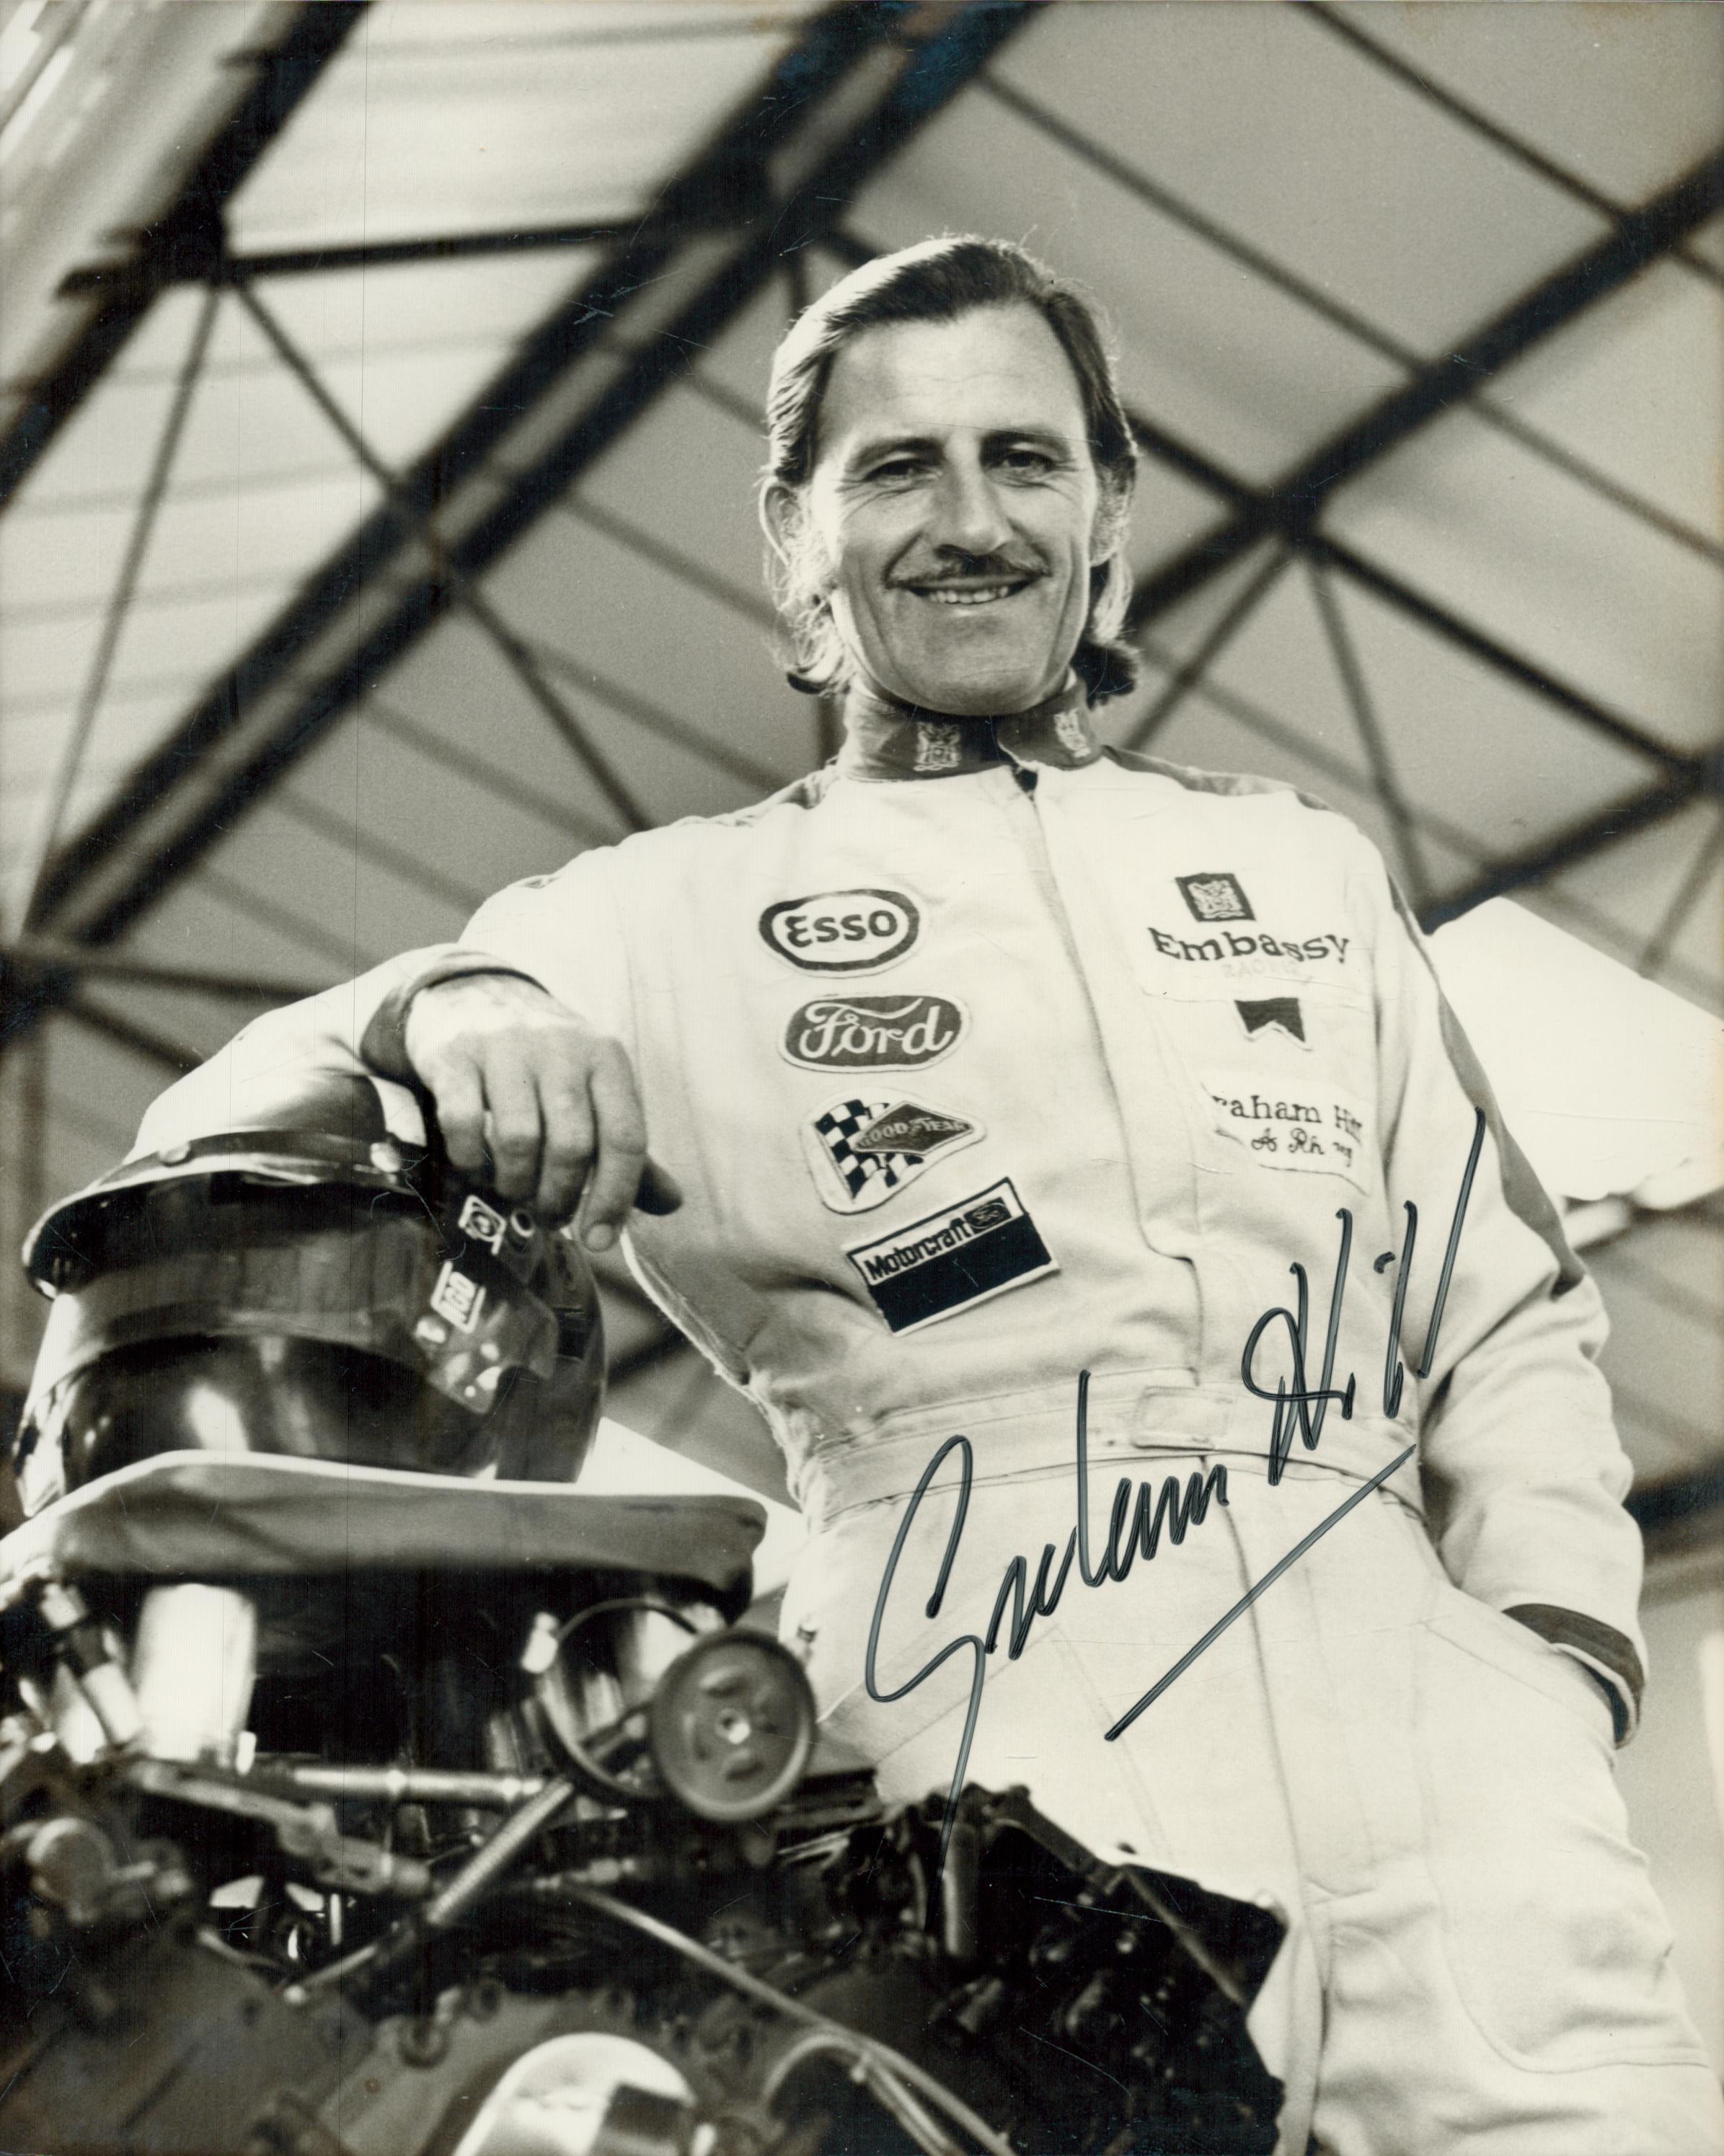 Formula 1 Graham Hill signed rare 10 x 8 inch b/w photo in racing suit, very tough to find in this